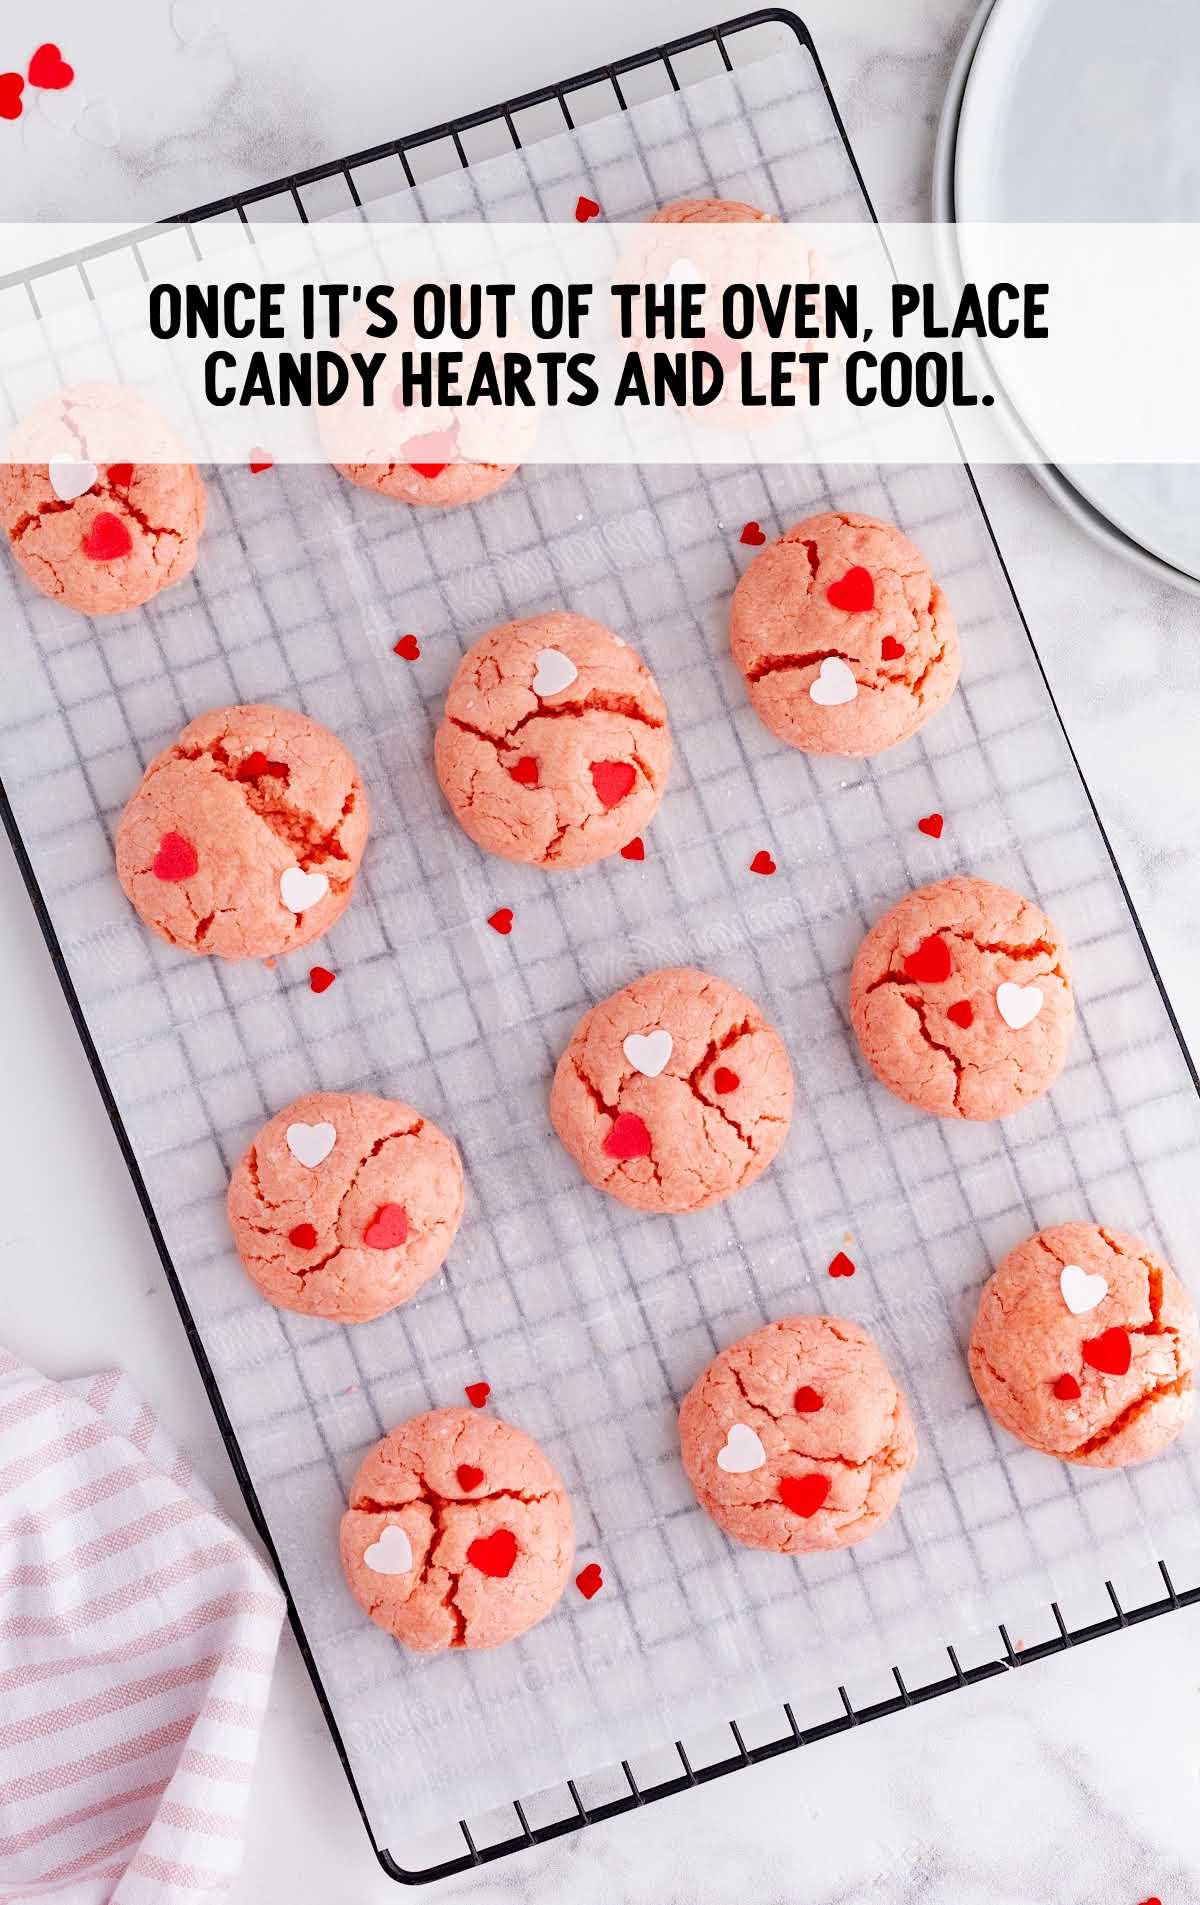 candy hearts placed on the cookies and let it cool down